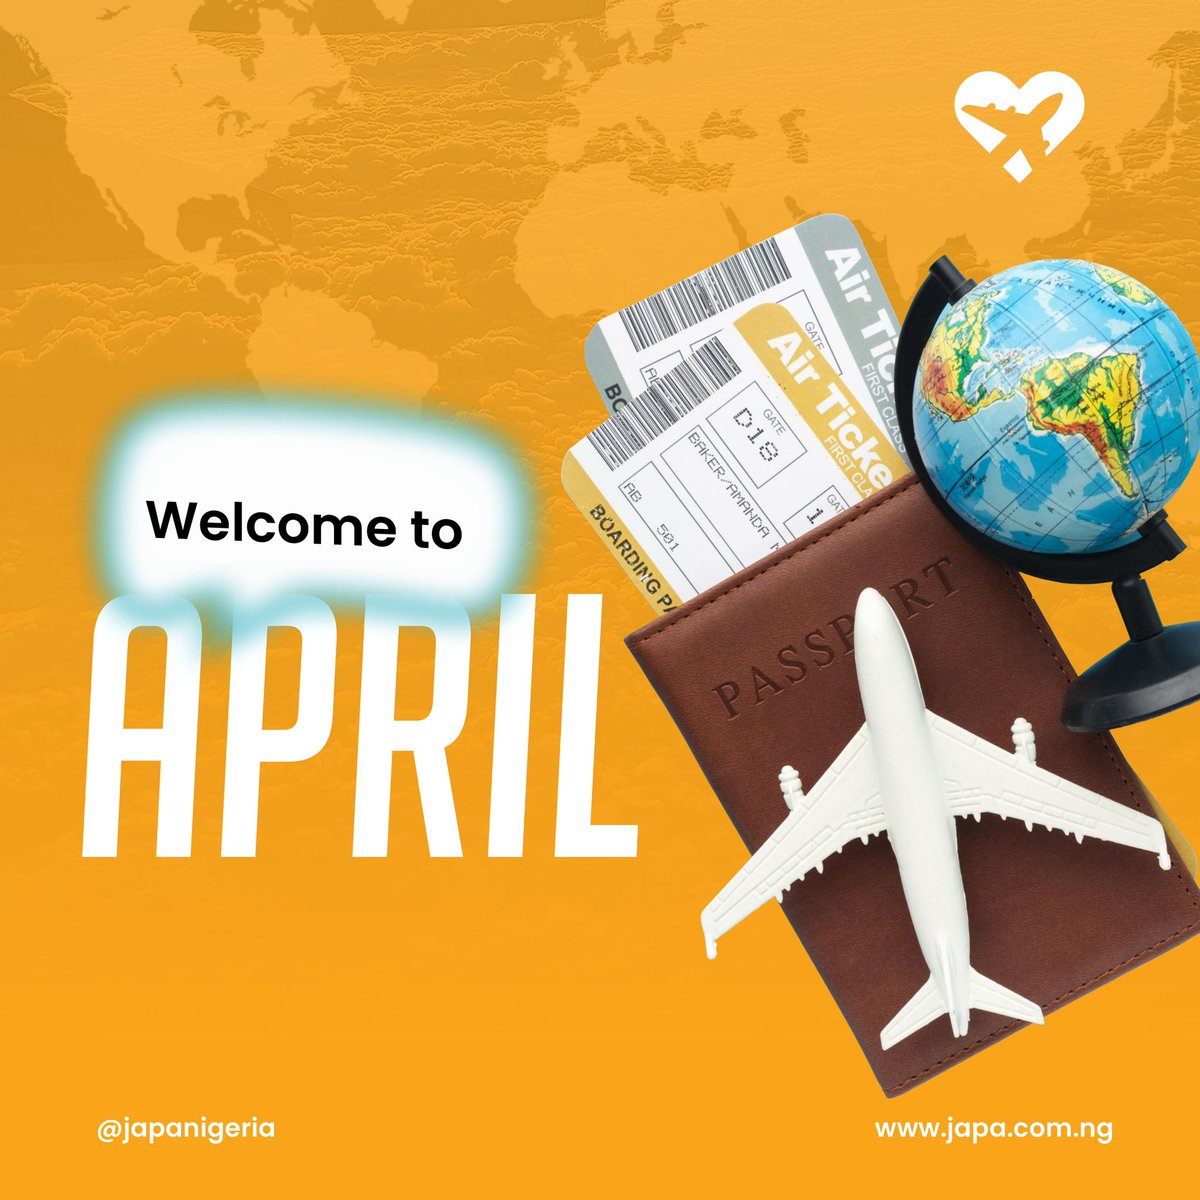 Hello April! Let’s welcome this new month with open arms and hearts full of anticipation for the adventures ahead.

#japamediation #japa #japamedia
#japang #japabuddy #japaexperience #japanigeria #japanews #newmonth #april